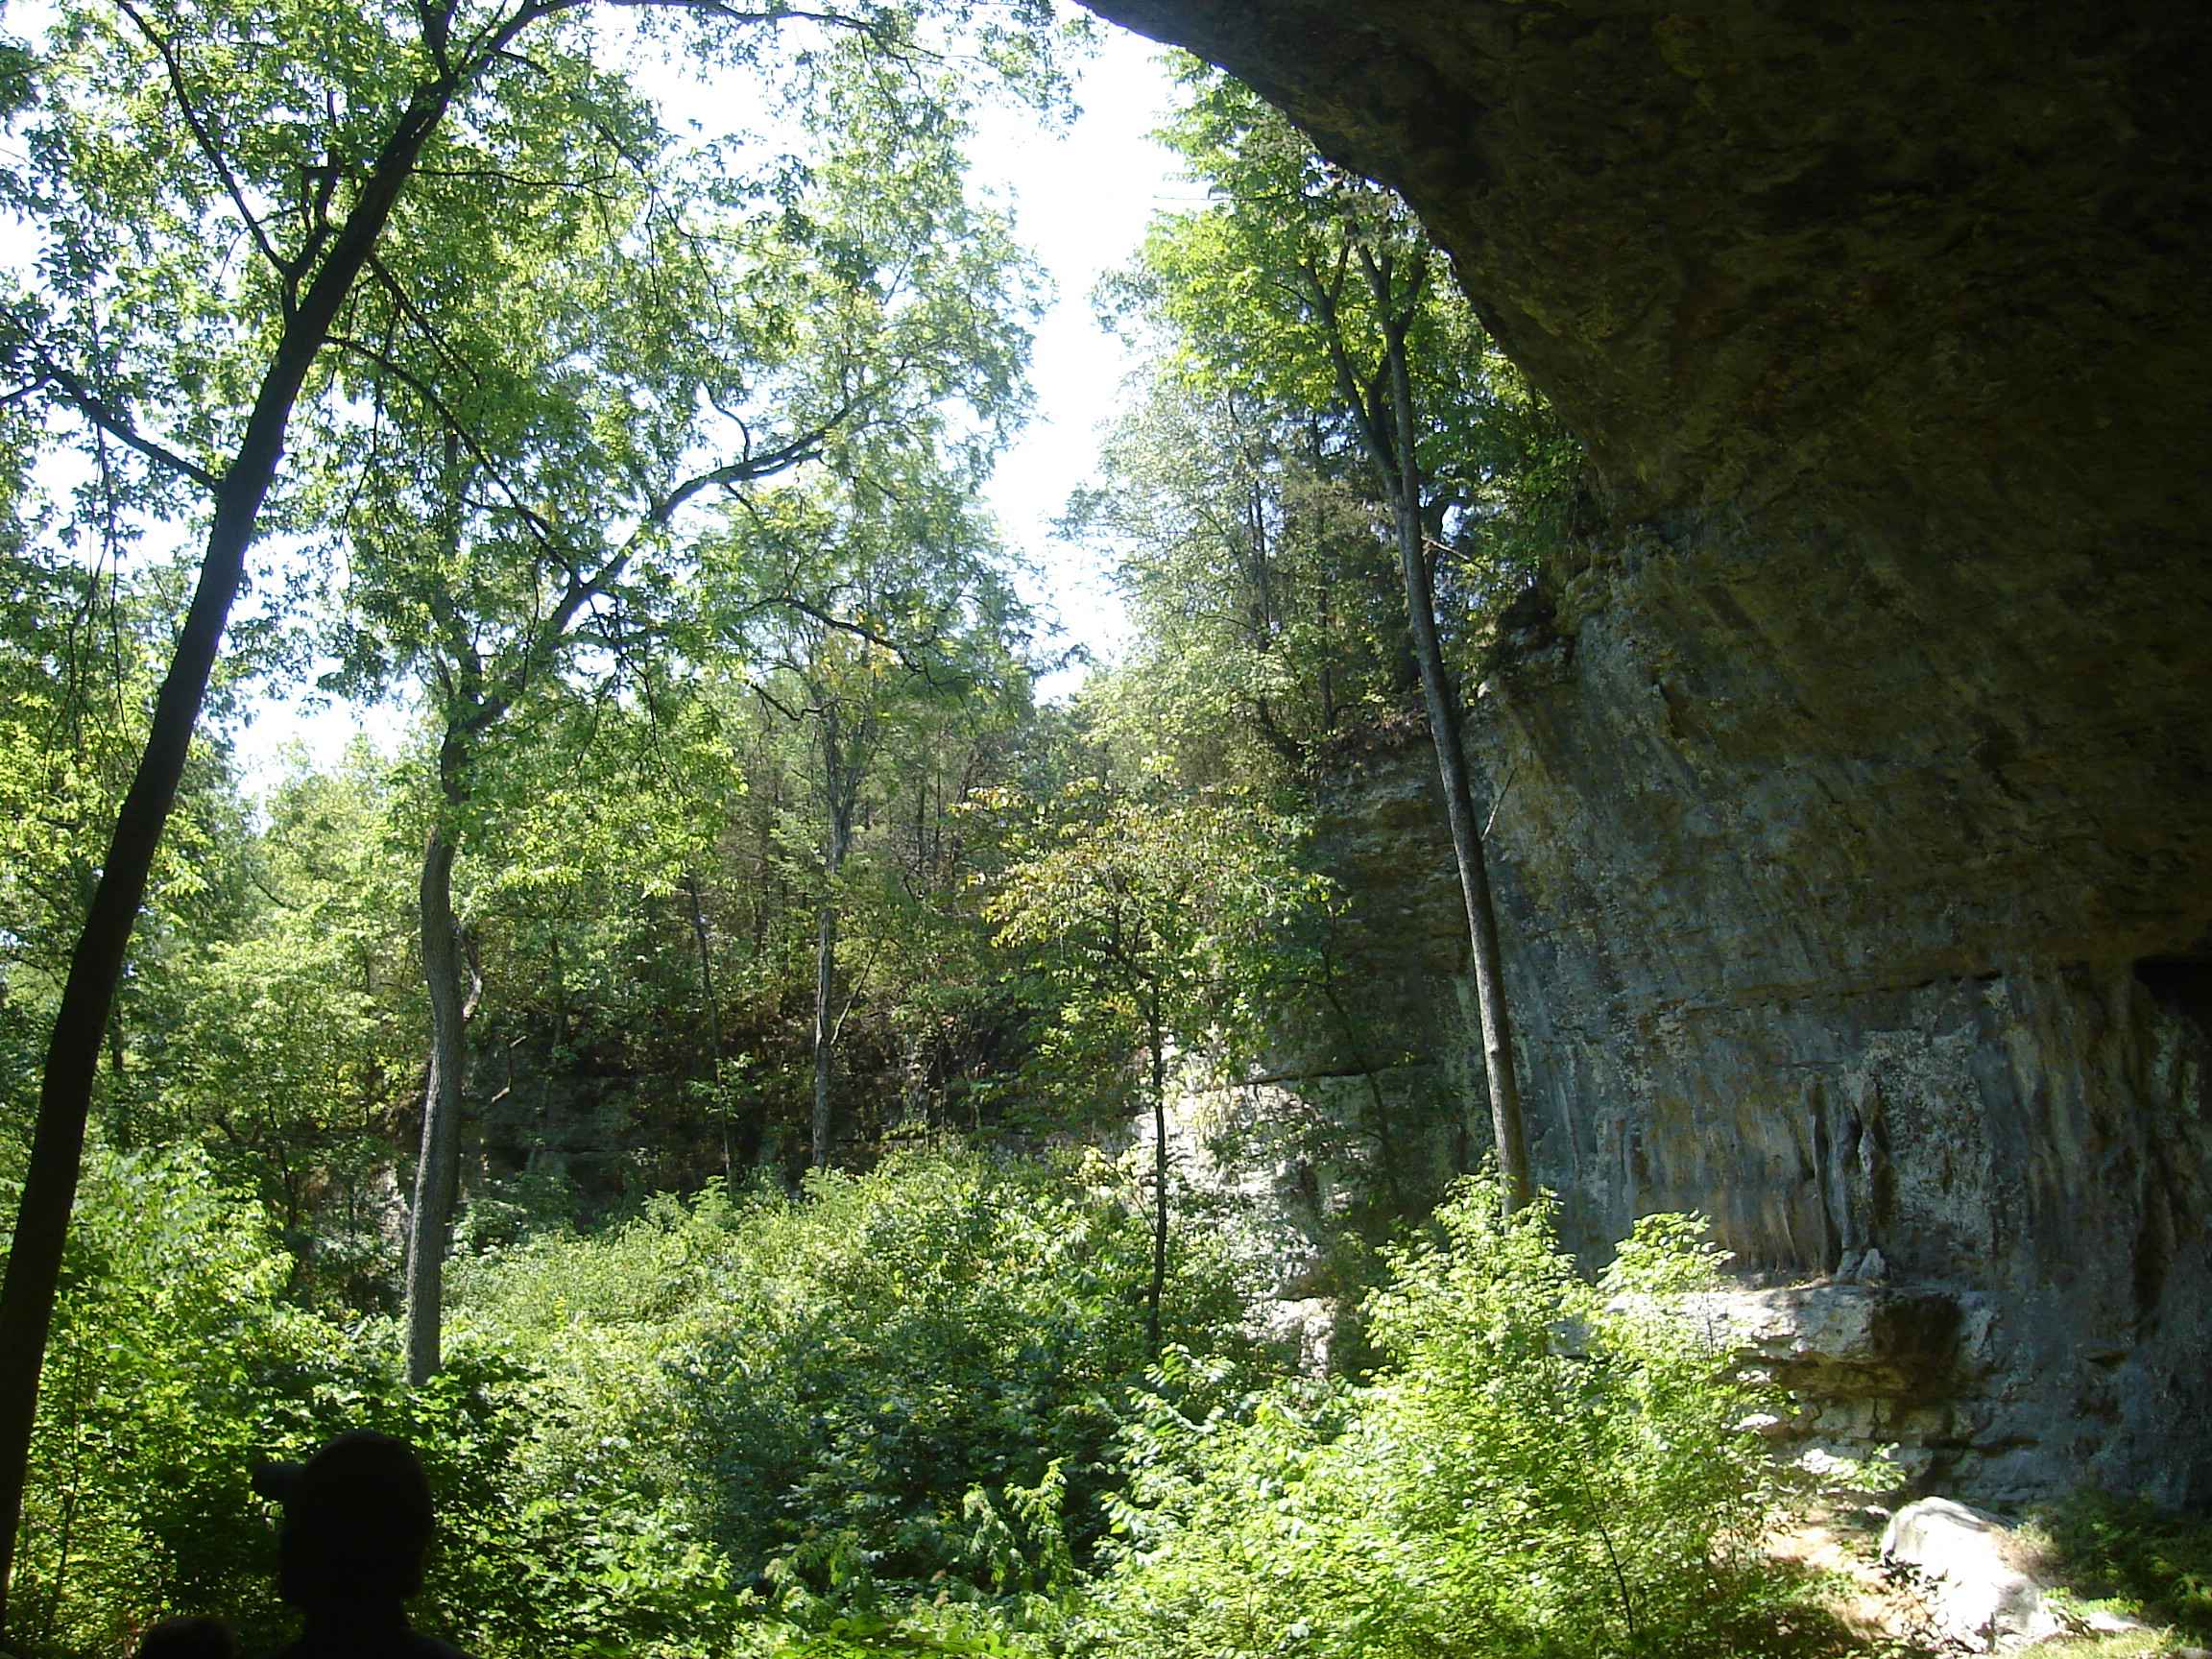 Smallin Cave entrance from inside